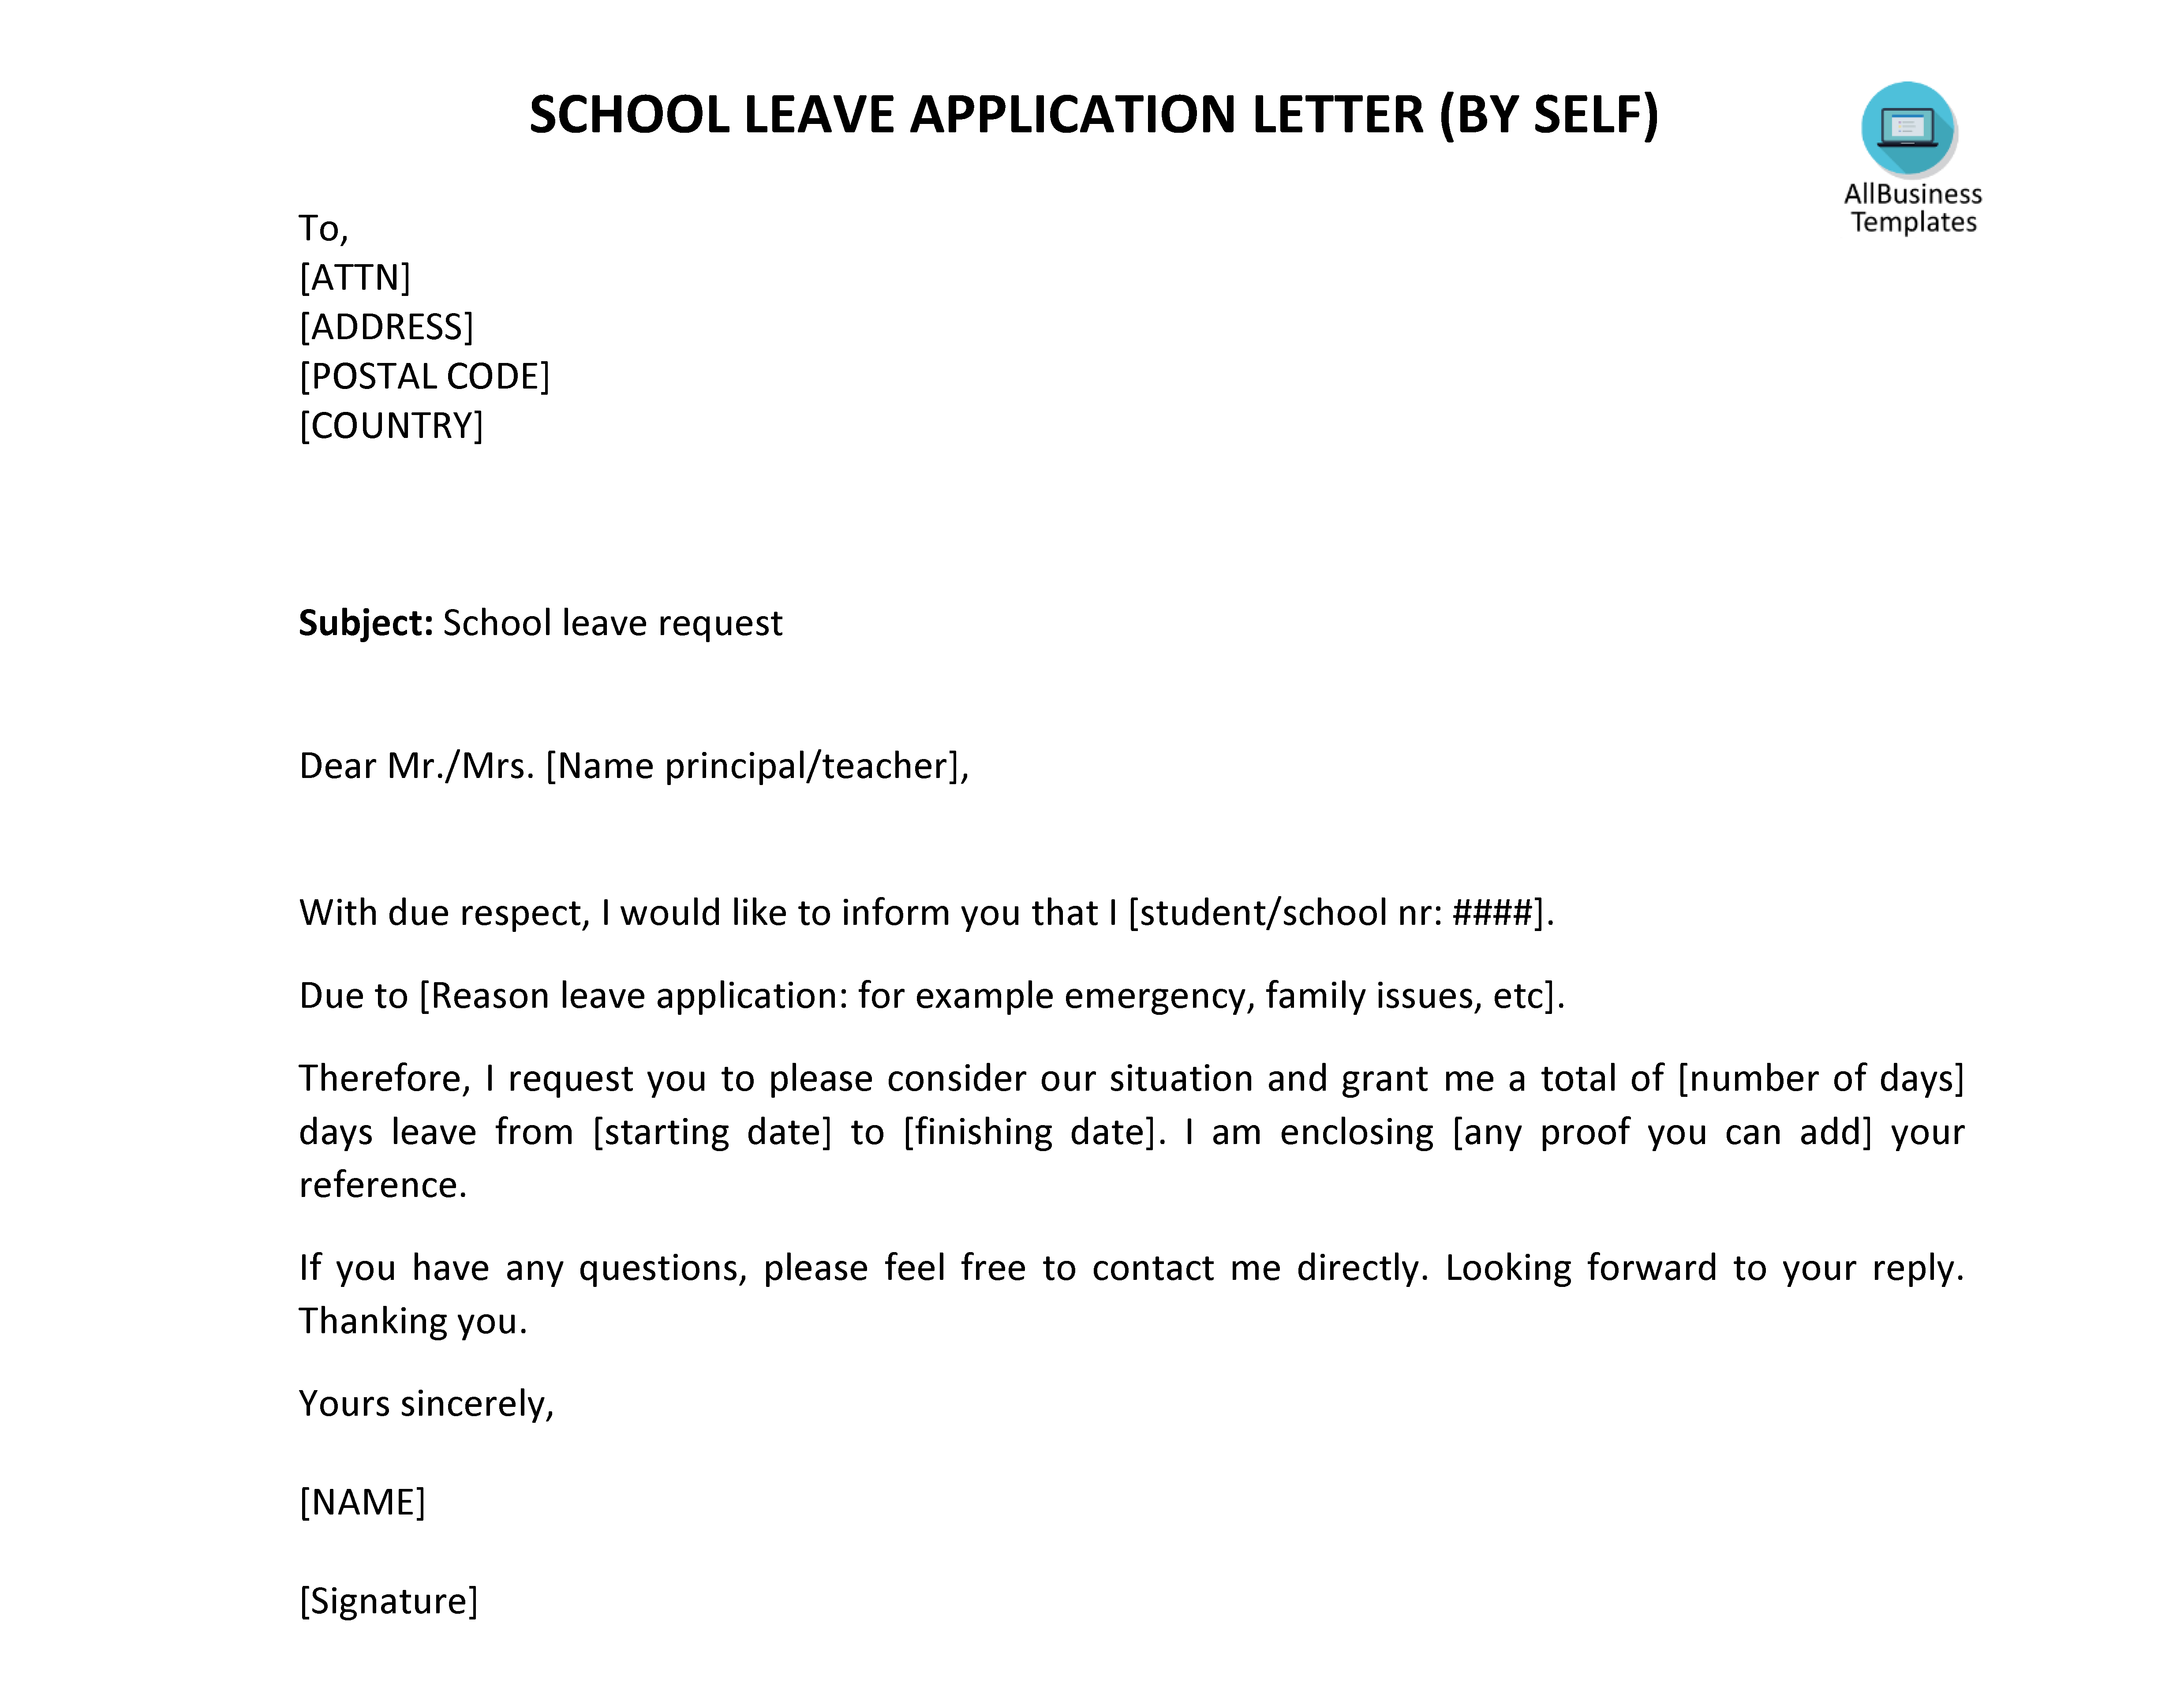 School Leave Letter By Self main image